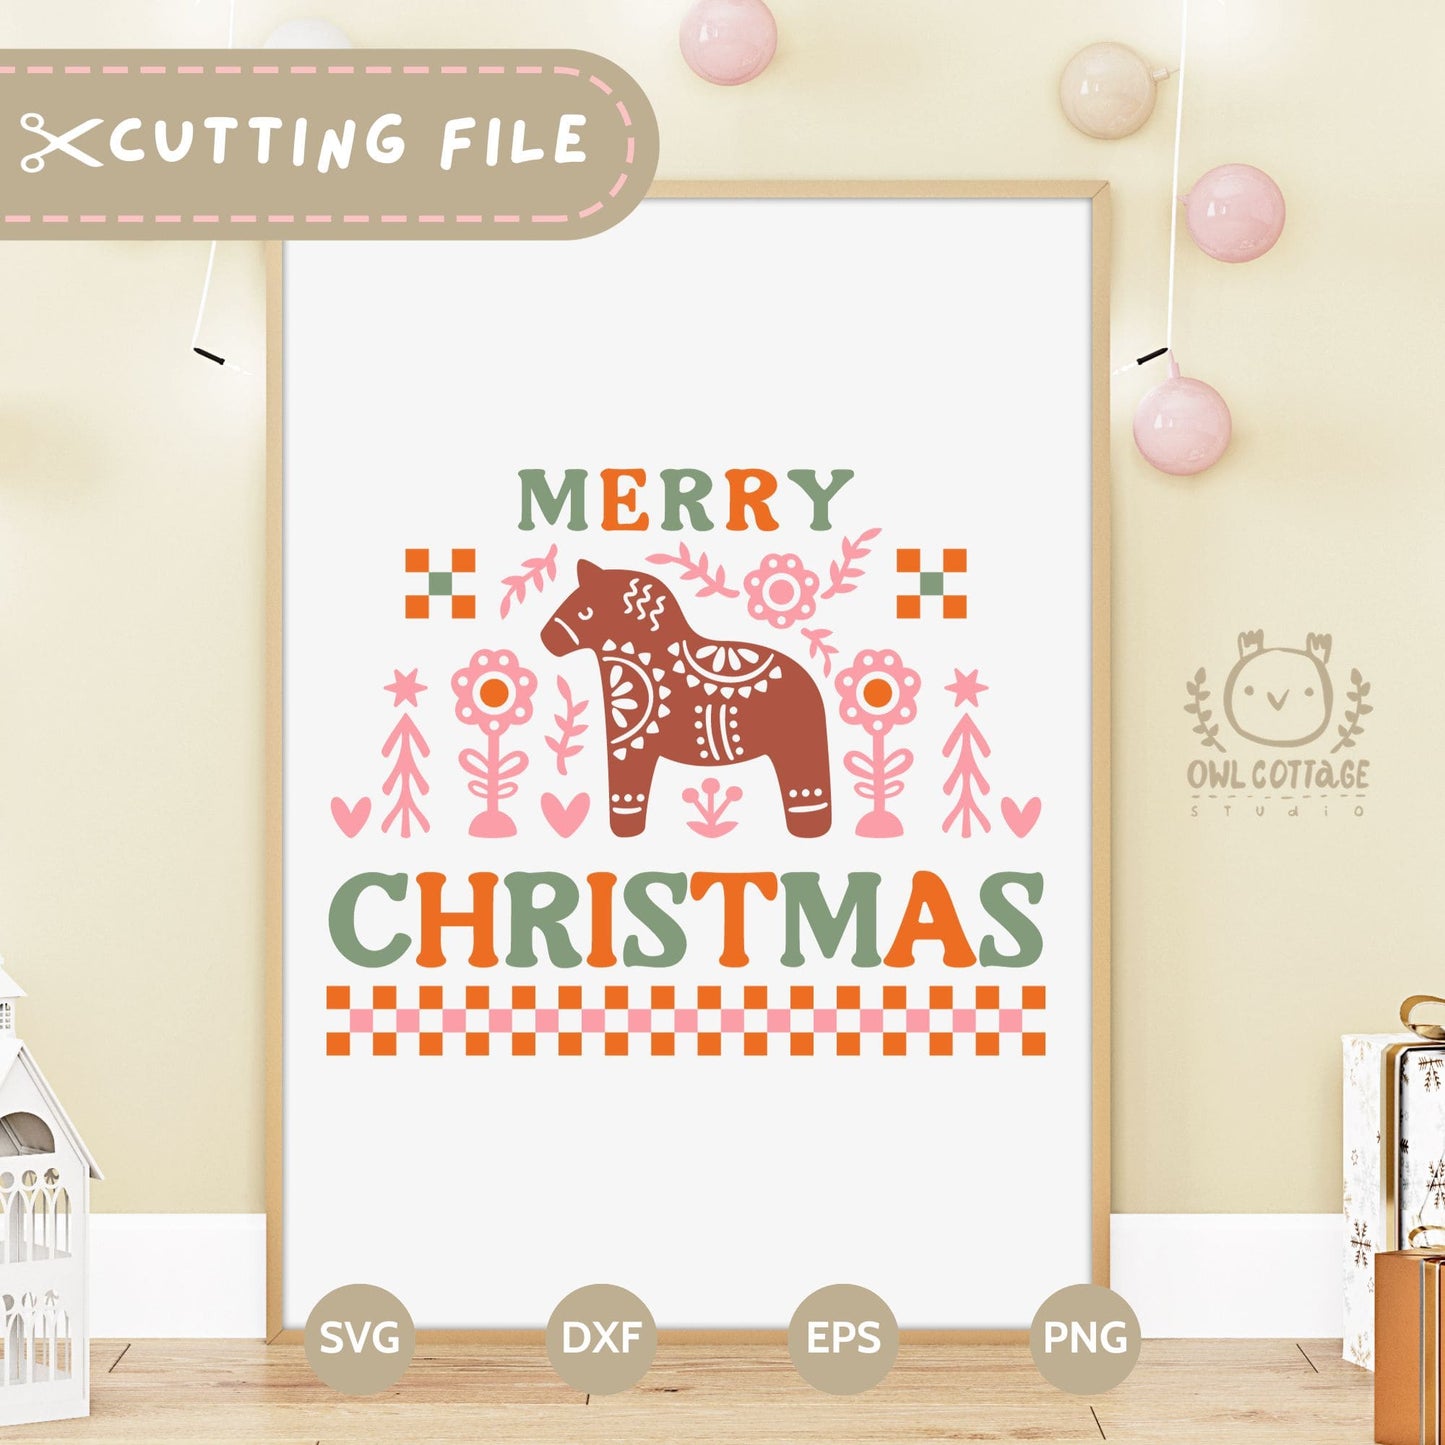 Merry Christmas Clipart by Owl Cottage Studio